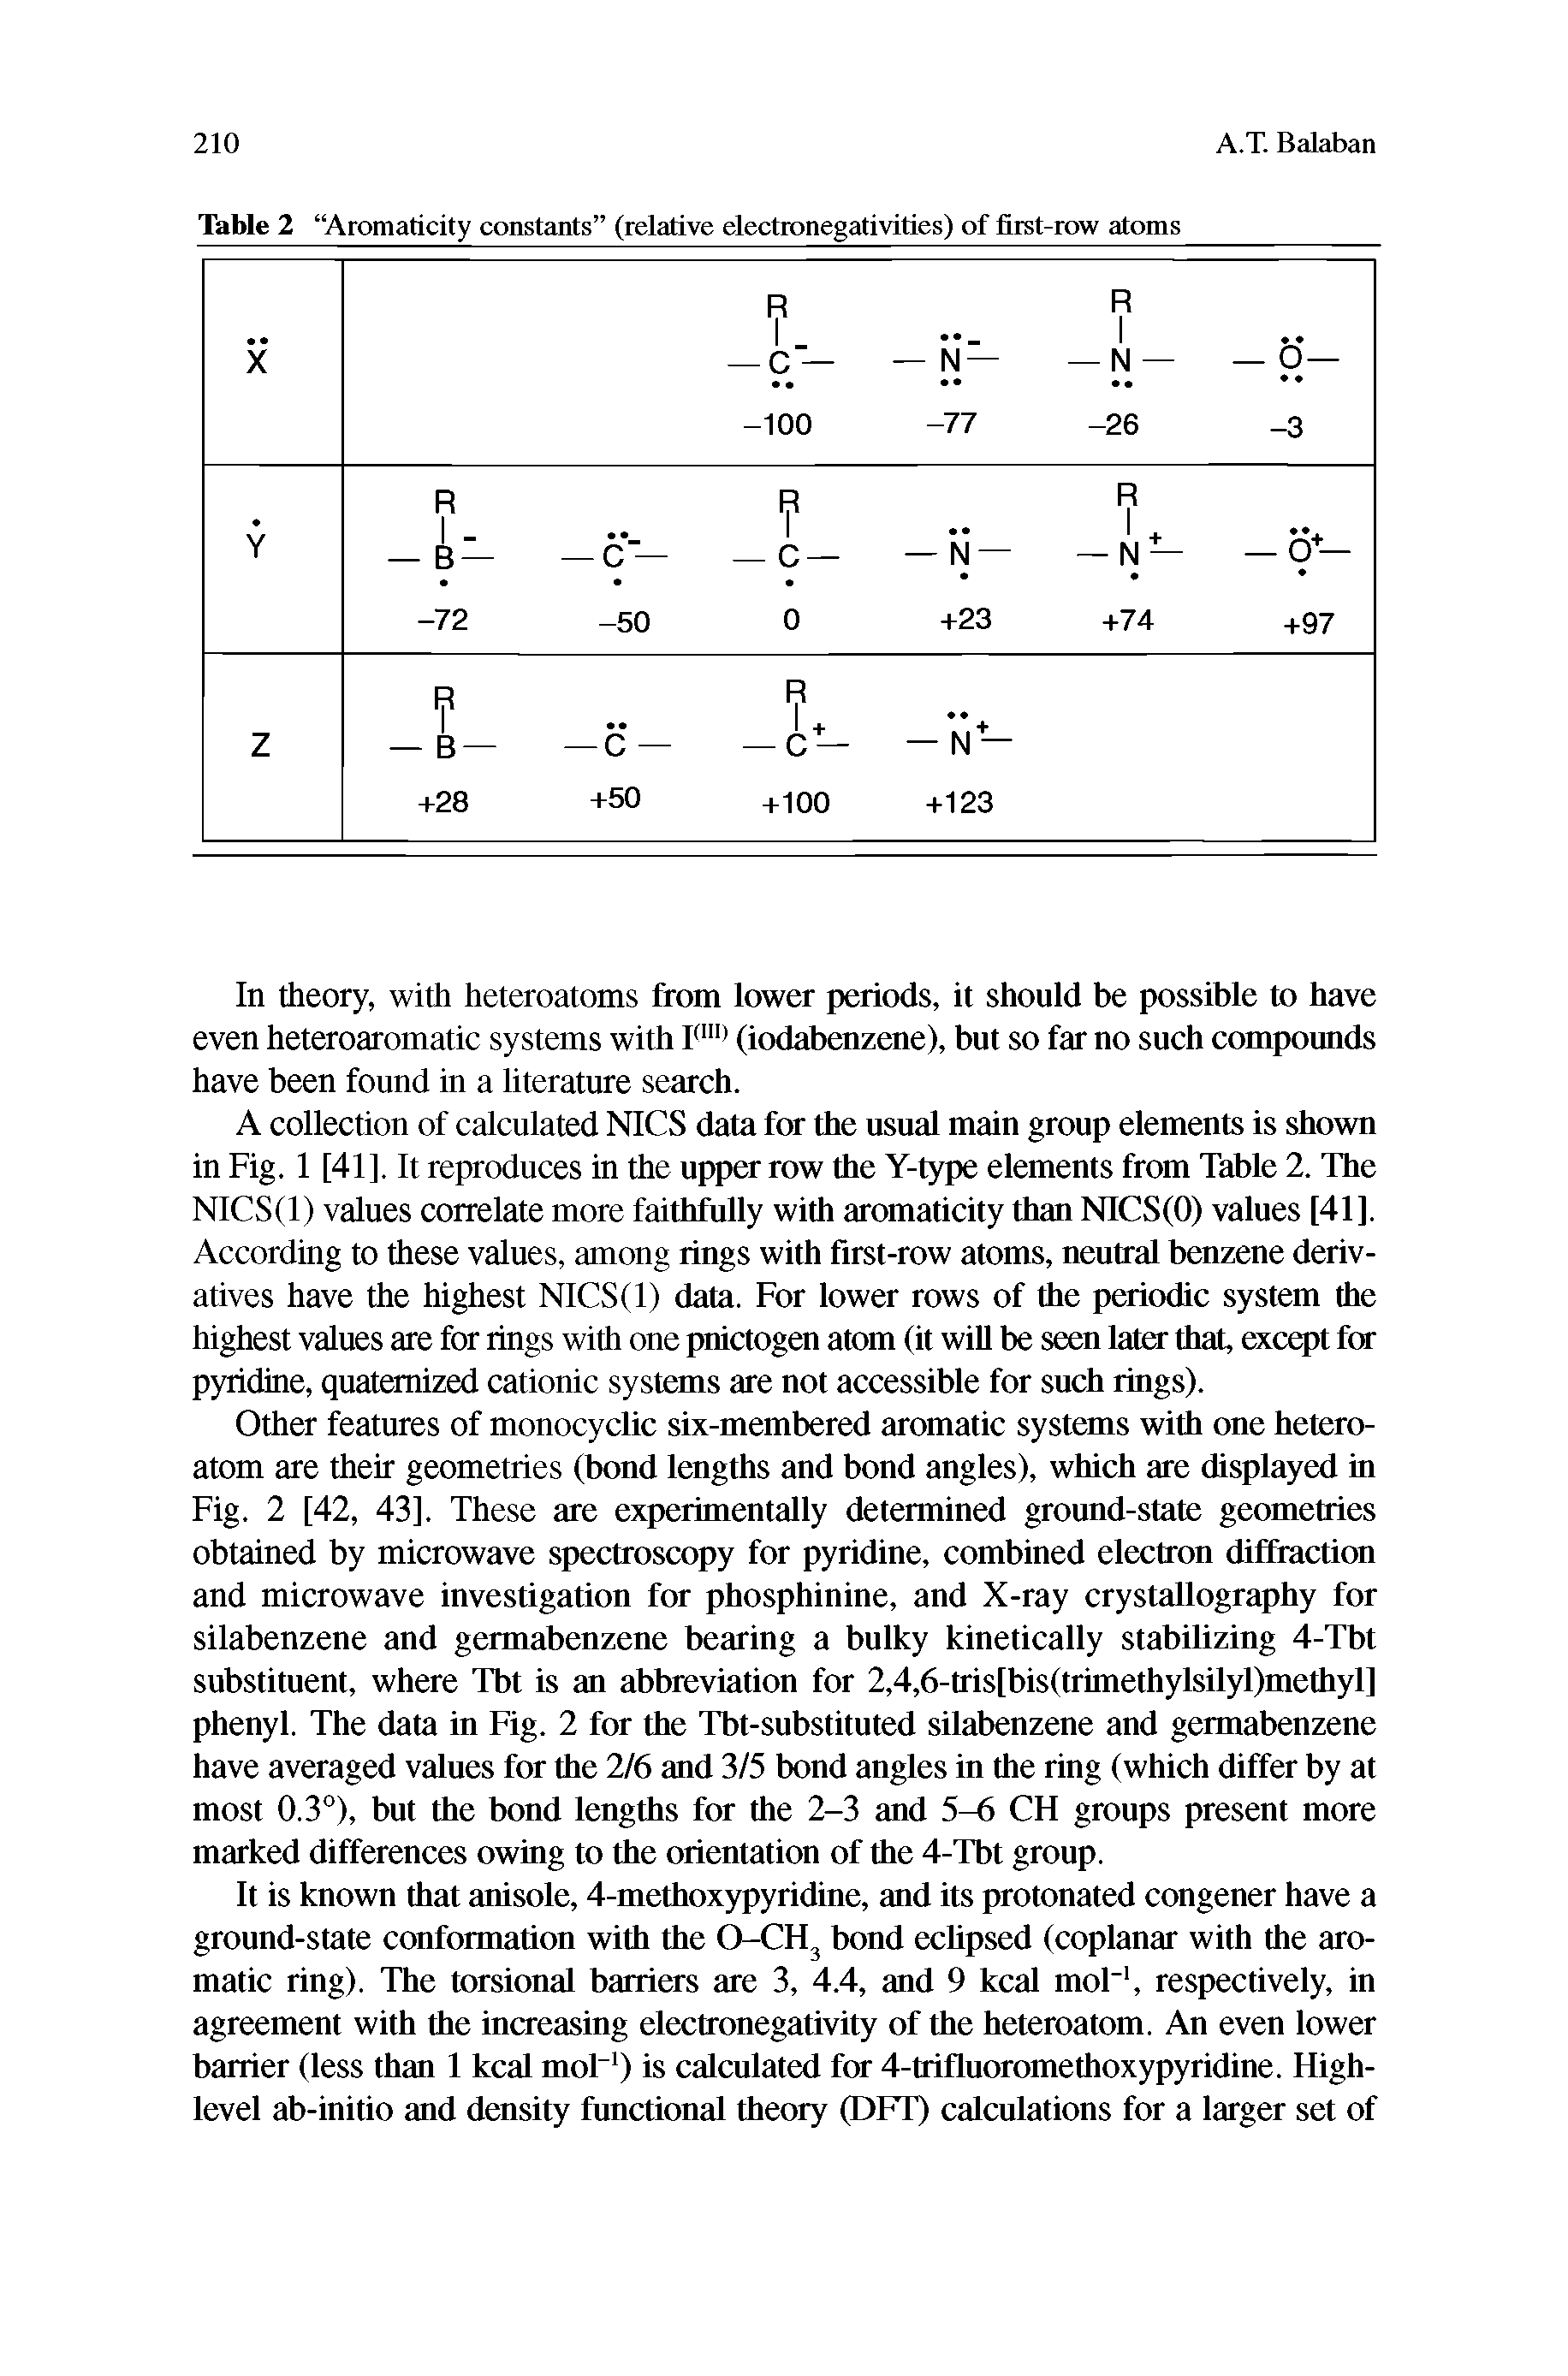 Table 2 Aromaticity constants (relative electronegativities) of first-row atoms...